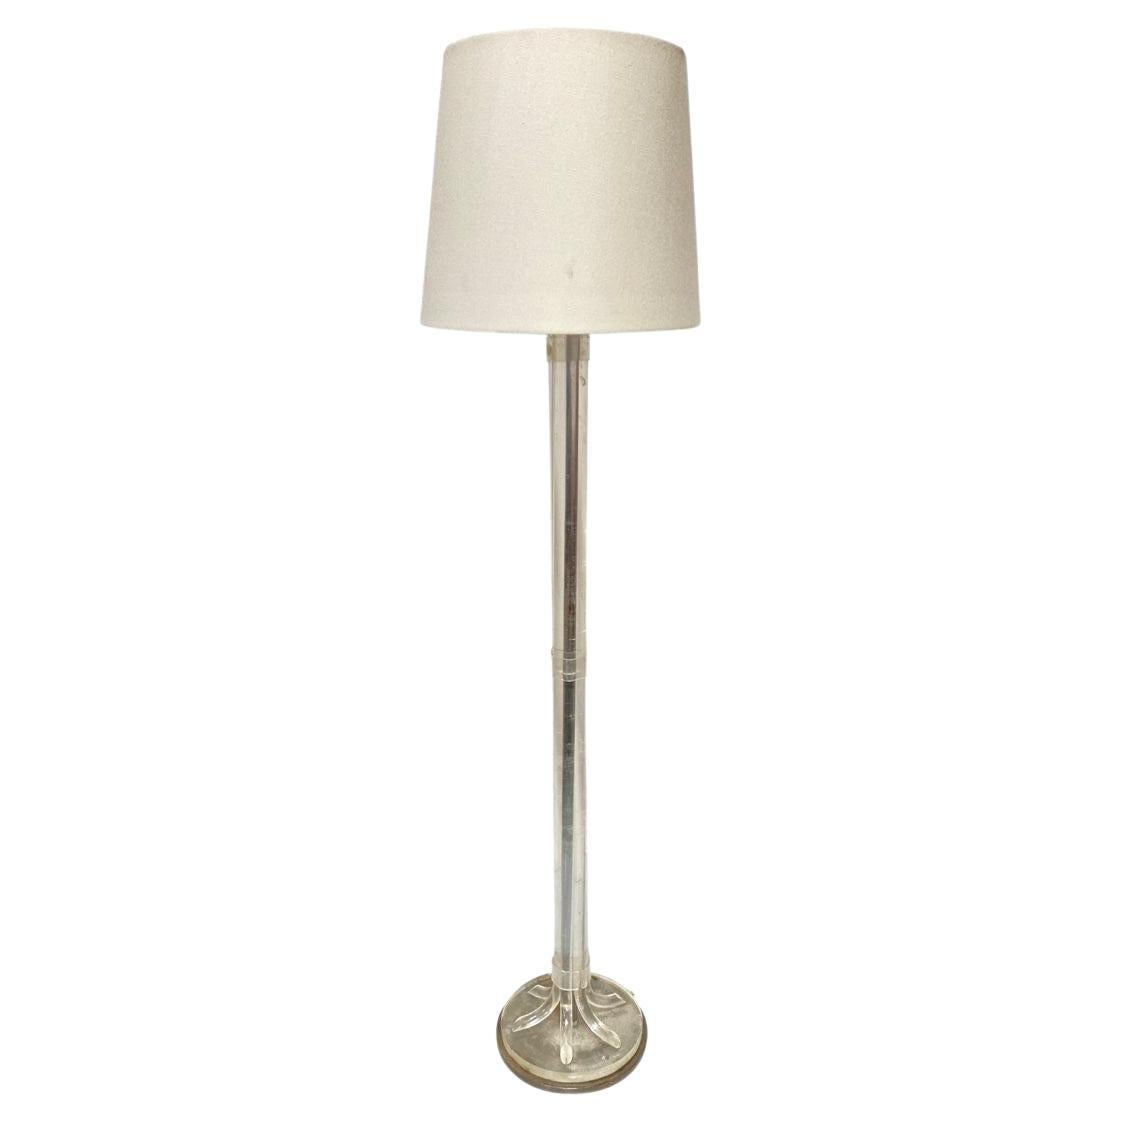 Hollywood Regency Lucite and Chrome Floor Lamp For Sale